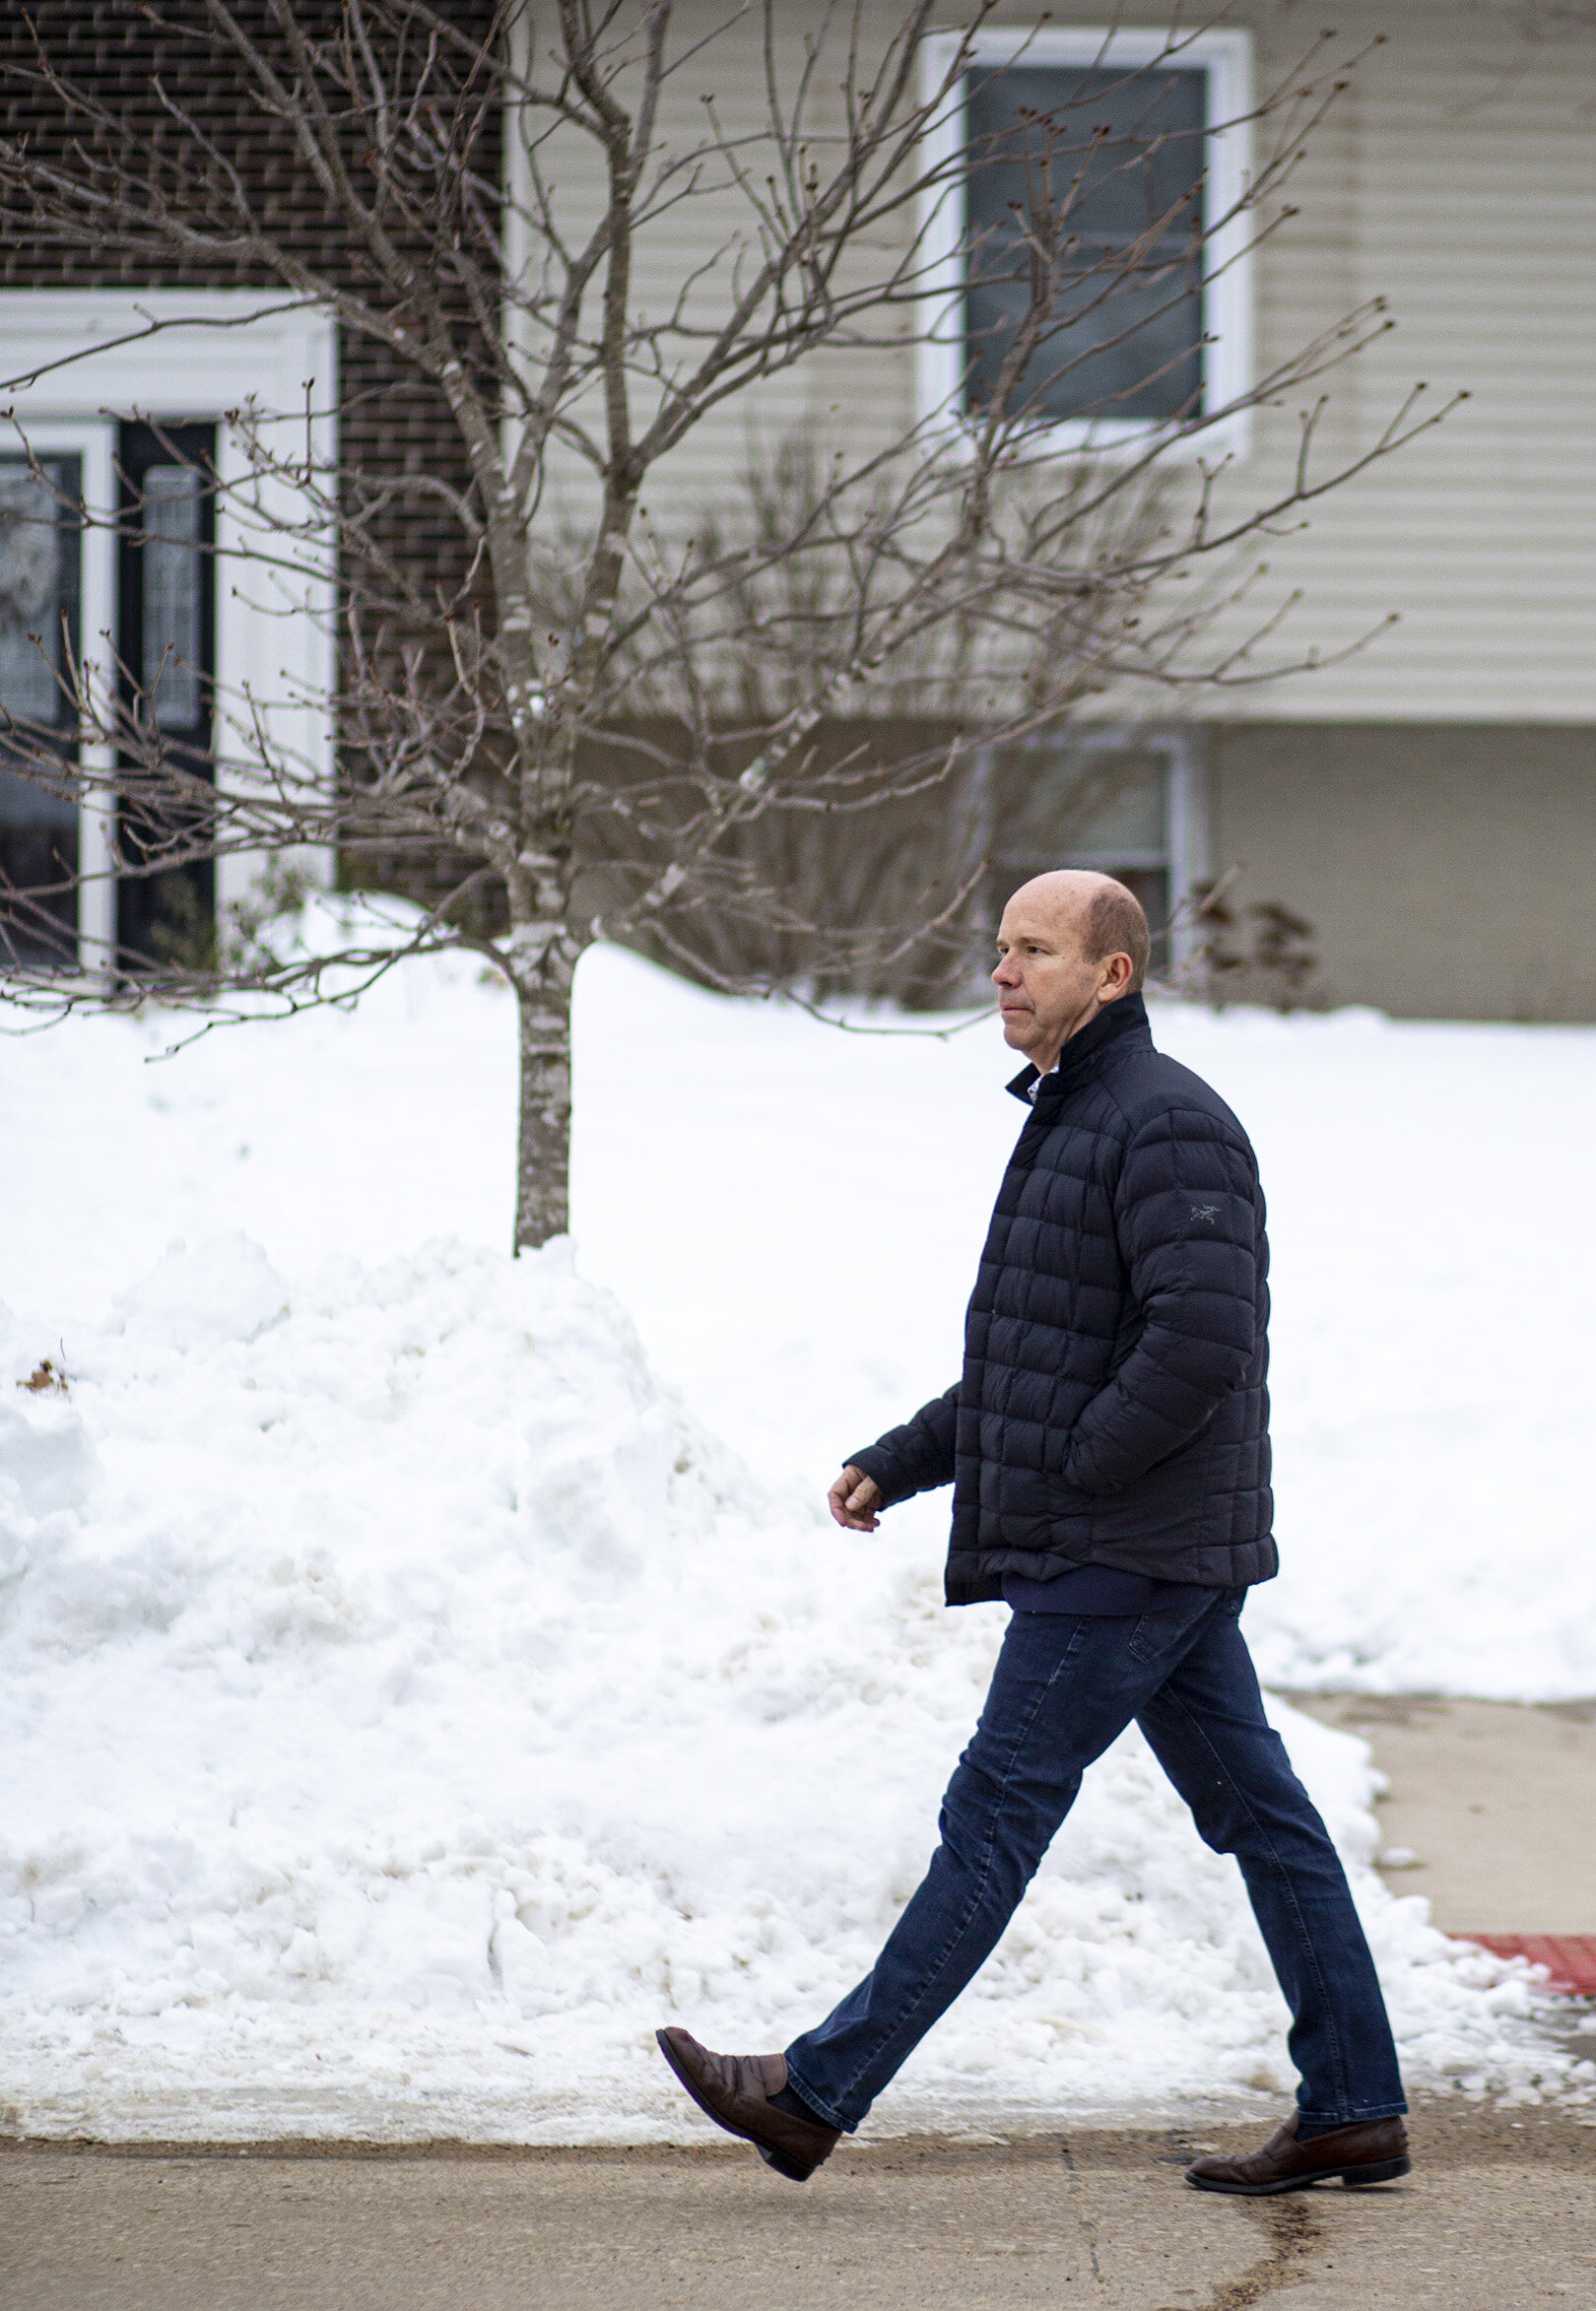  Democratic presidential candidate former U.S. Rep. John Delaney walks along Windsor Drive NE to knock on doors in Cedar Rapids, Iowa, Thursday. While walking down the street someone in the neighborhood yelled, “Trump 2020,” from afar to the candidat